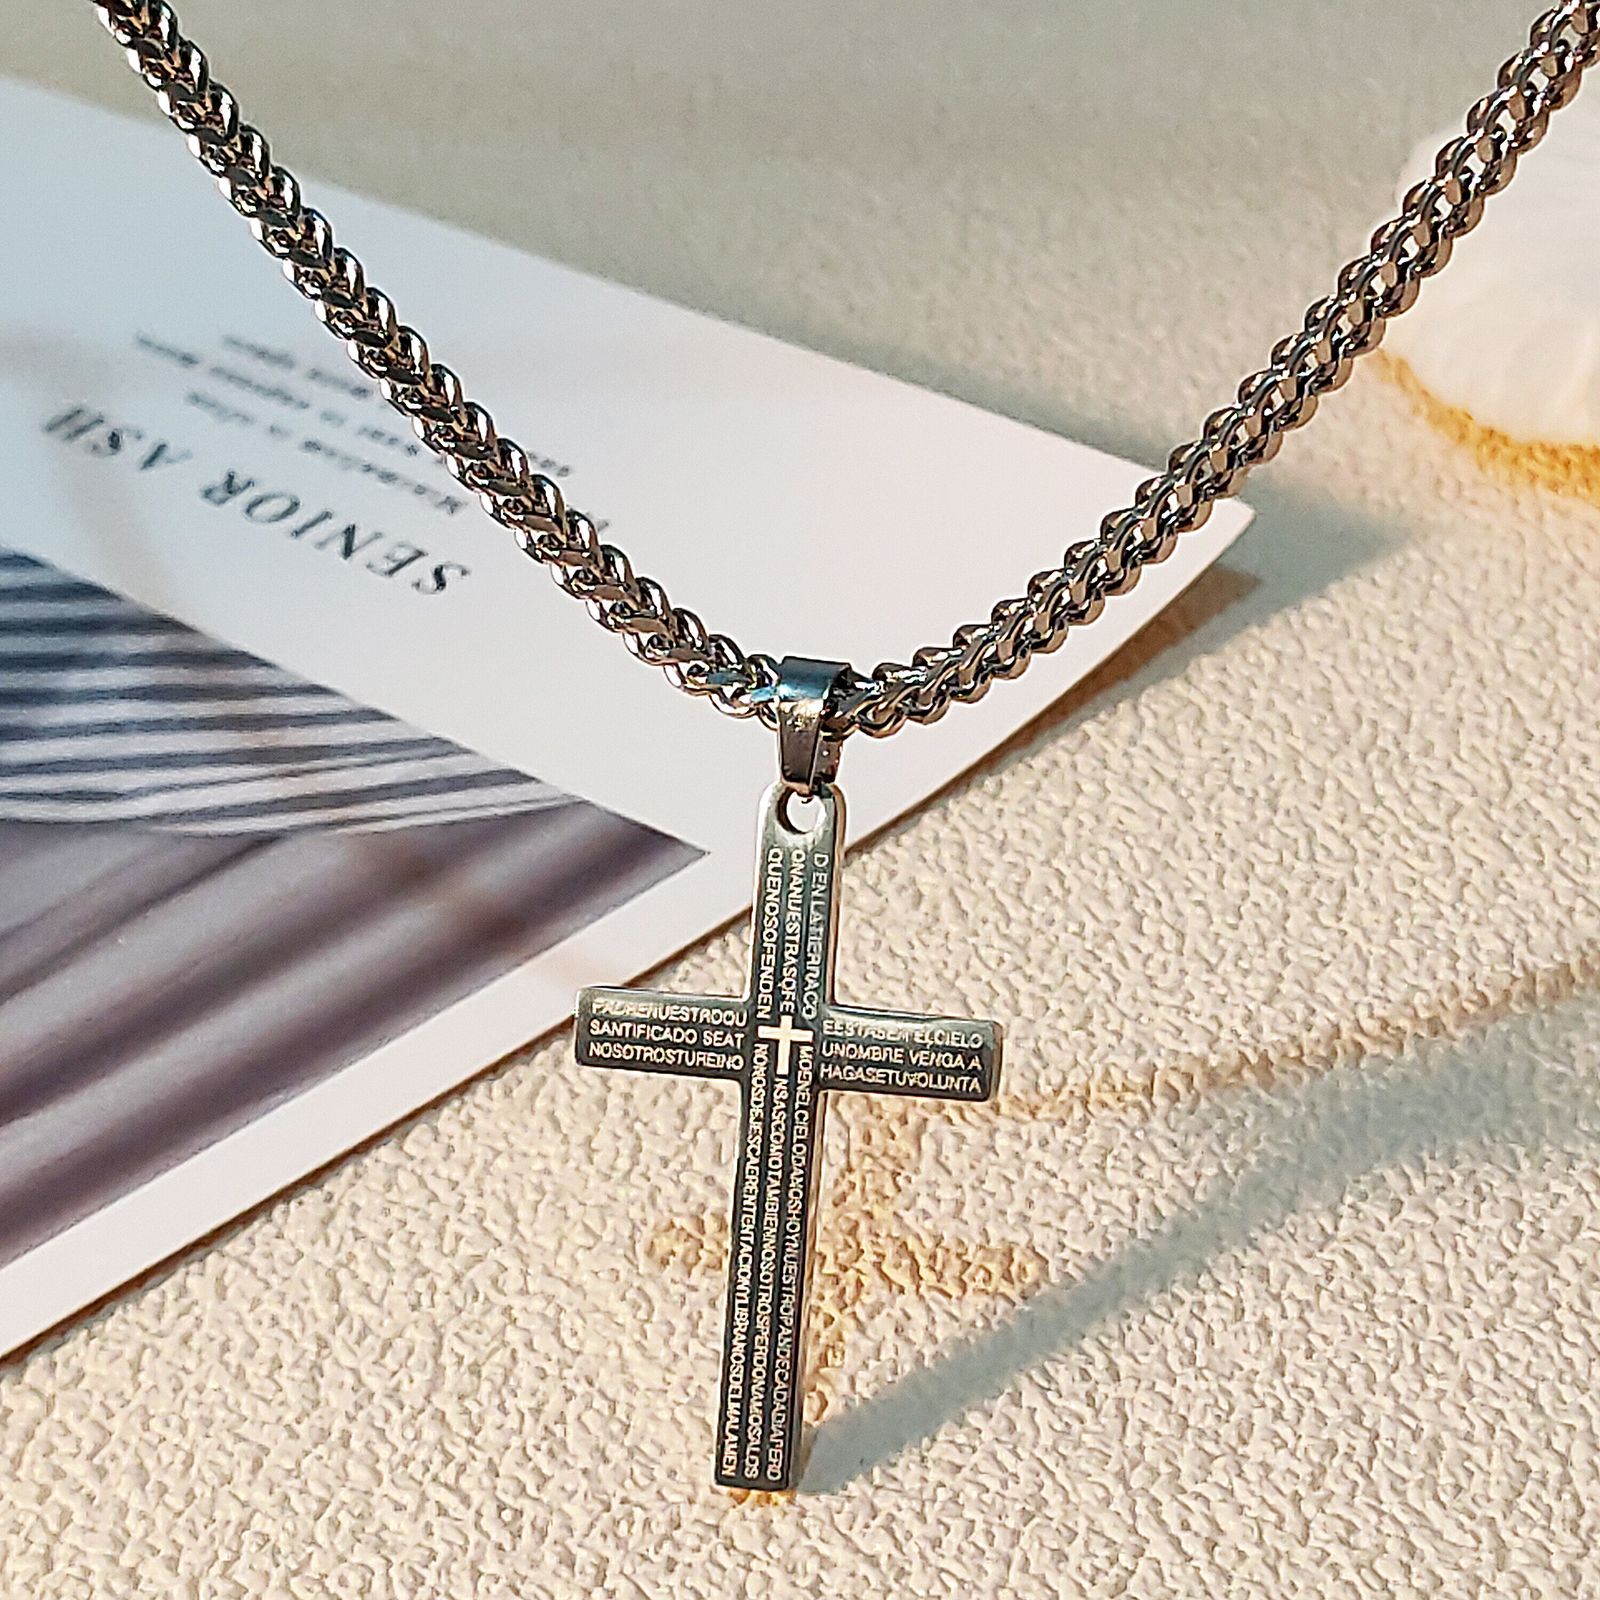 Stainless steel cross necklace with reversible chain